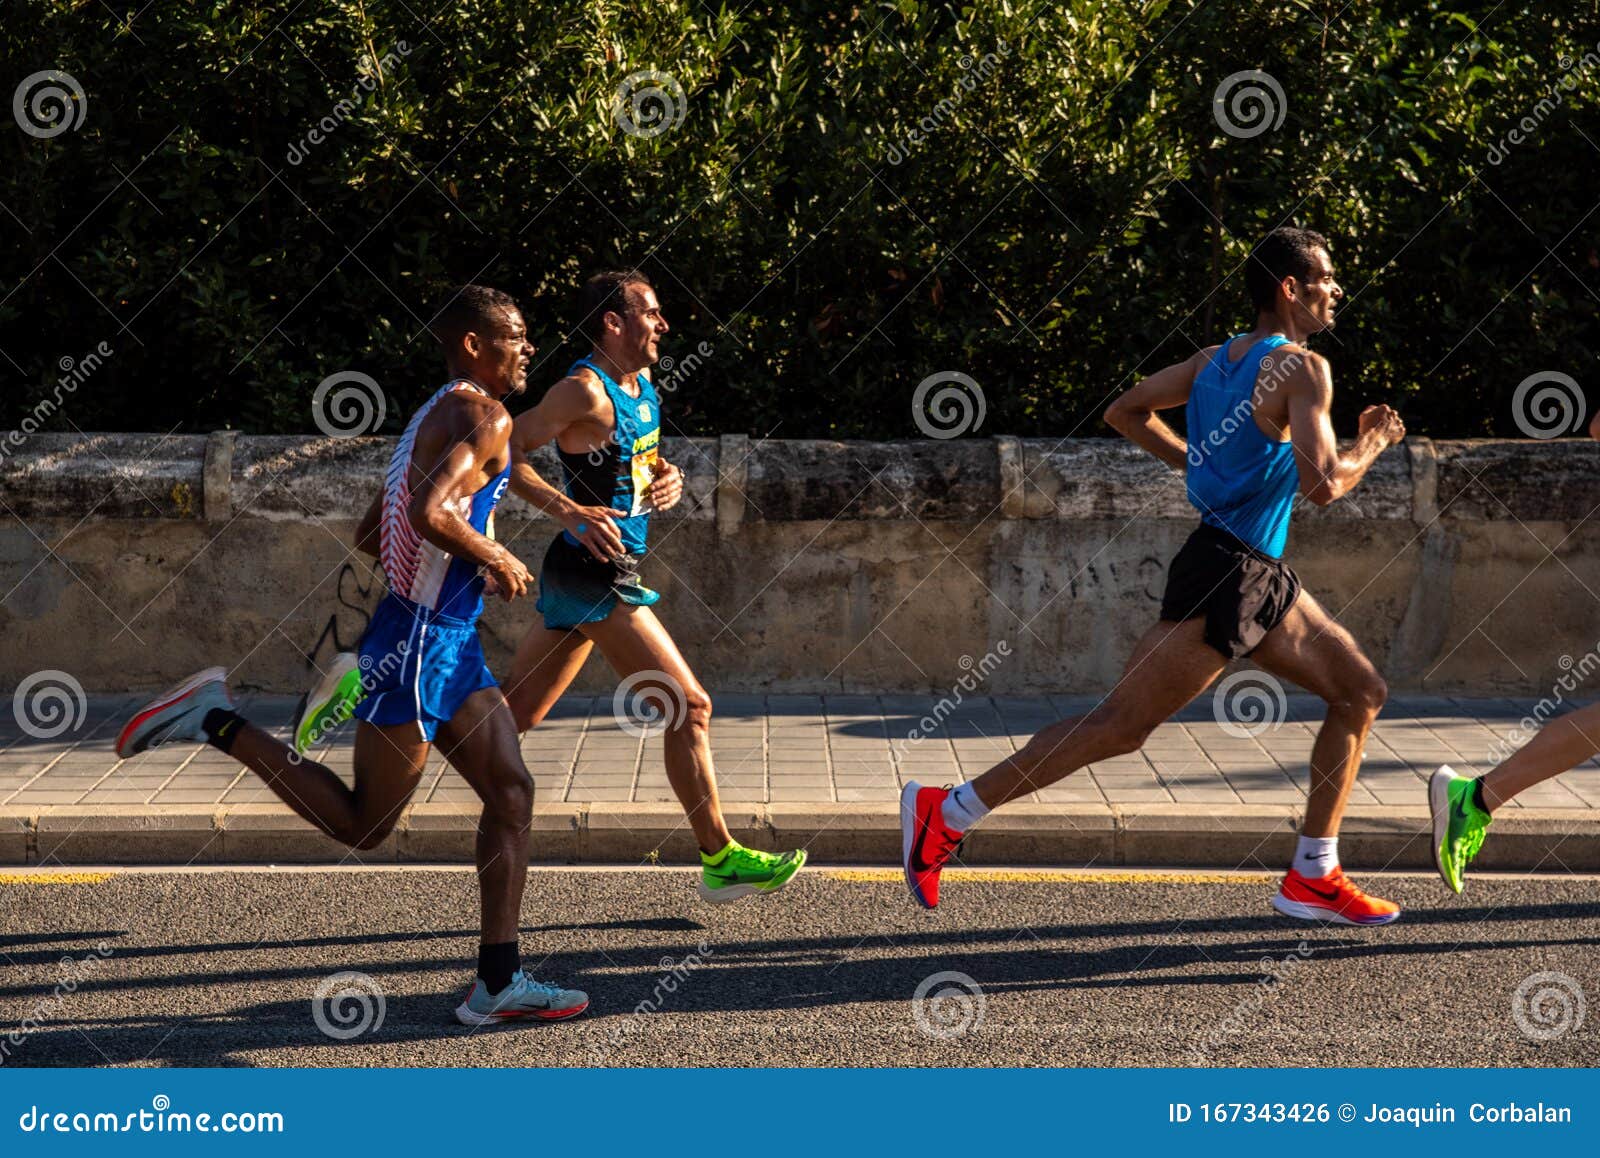 Valencia, Spain - October 27, 2019: Participant in a Half Marathon Running on Asphalt of the City of Nike Editorial Photo - Image of challenge, active: 167343426